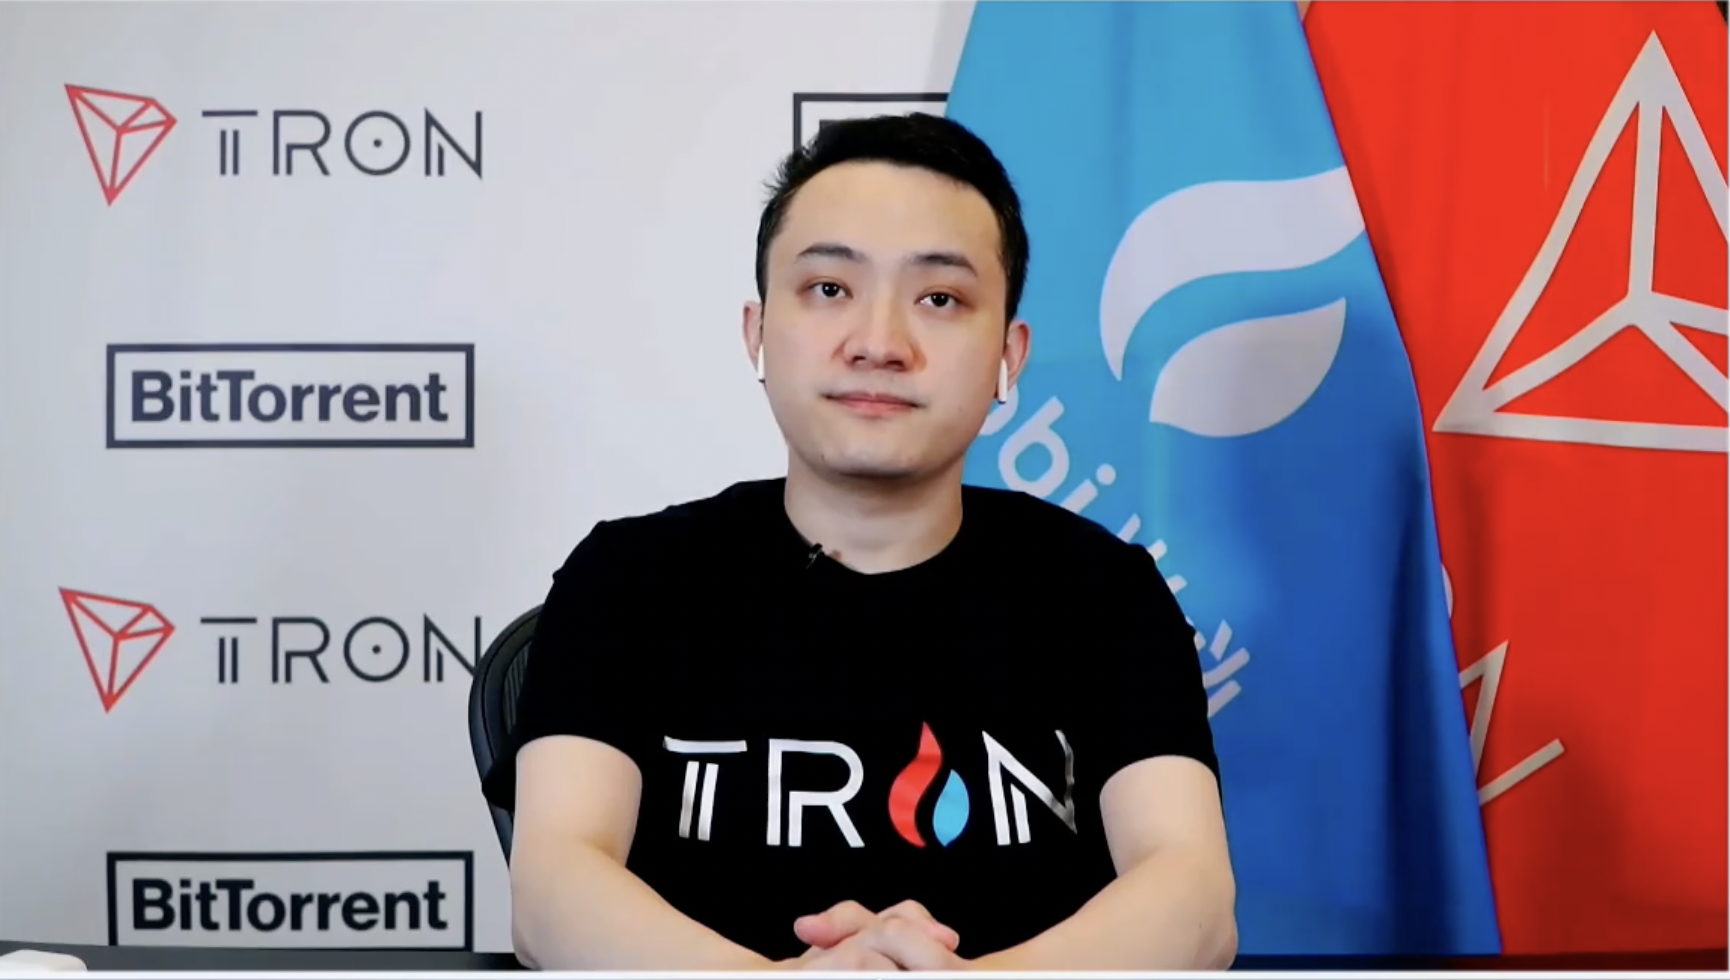 Tron Founder Justin Sun Unstakes $30M of Ether from Lido, Sends Tokens to Huobi